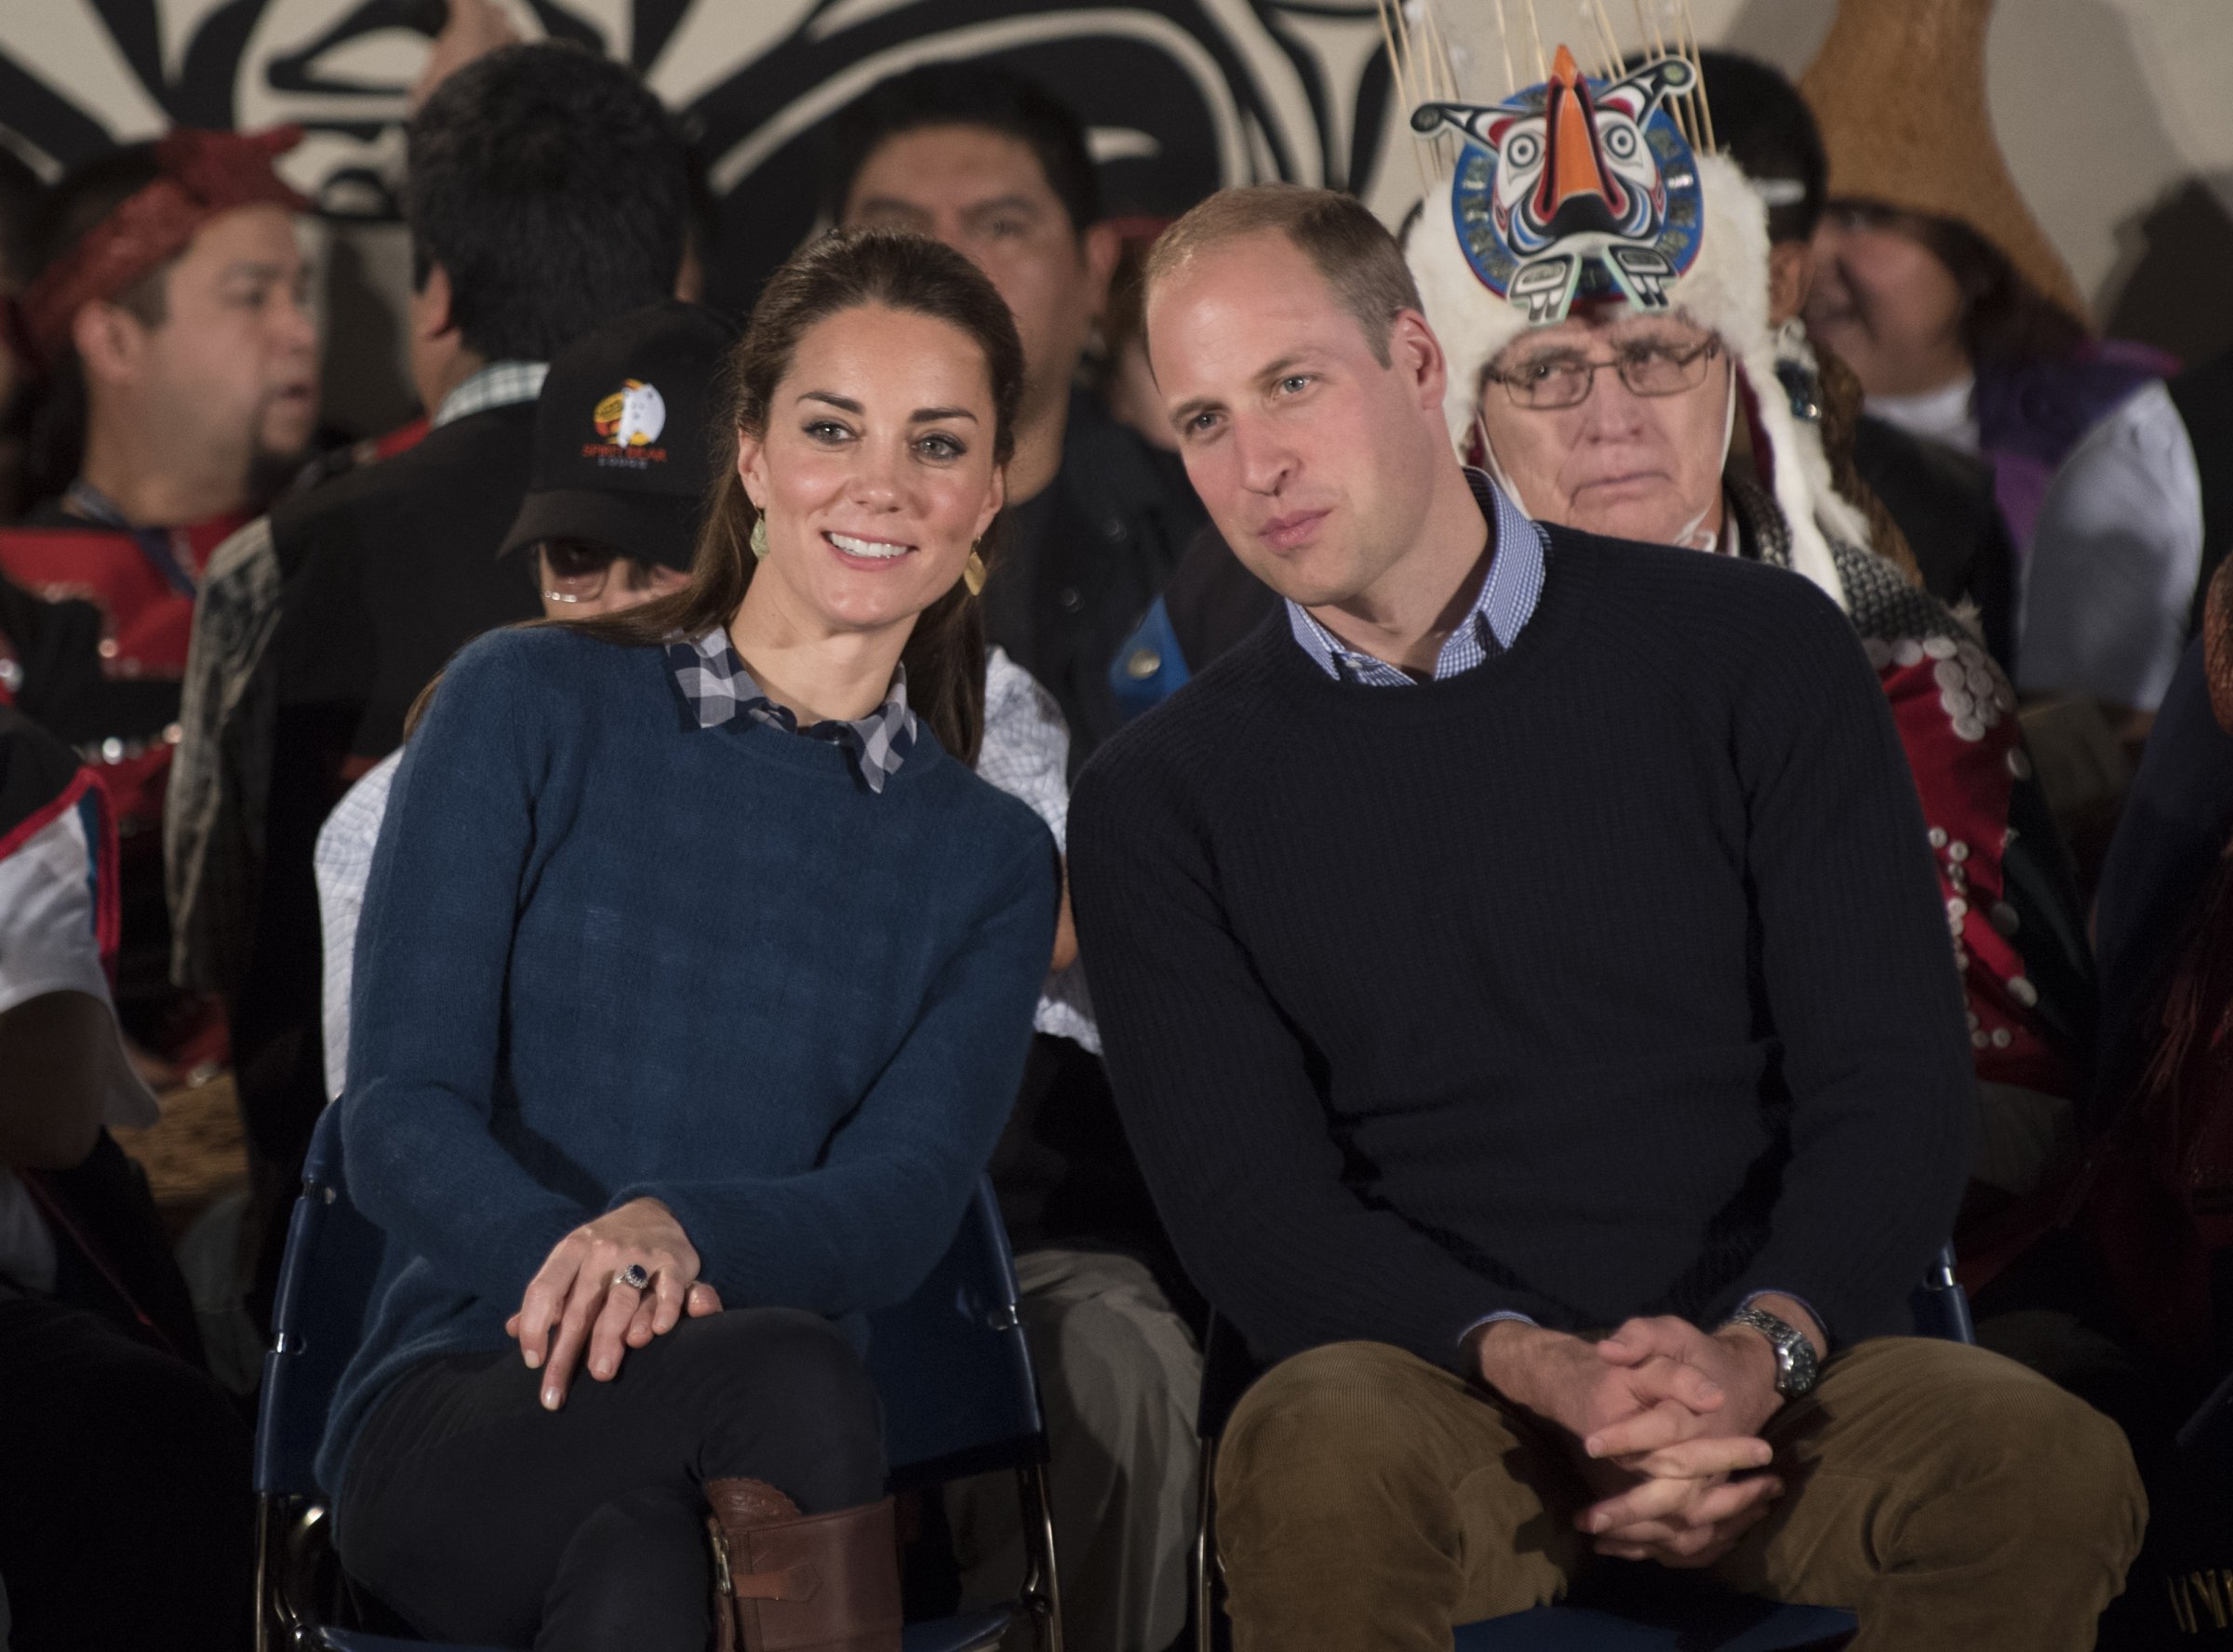 Catherine, Duchess of Cambridge and Prince William, Duke of Cambridge attend an official welcome performance during their visit to first nations Community members on September 25, 2016 in Bella Bella, Canada.